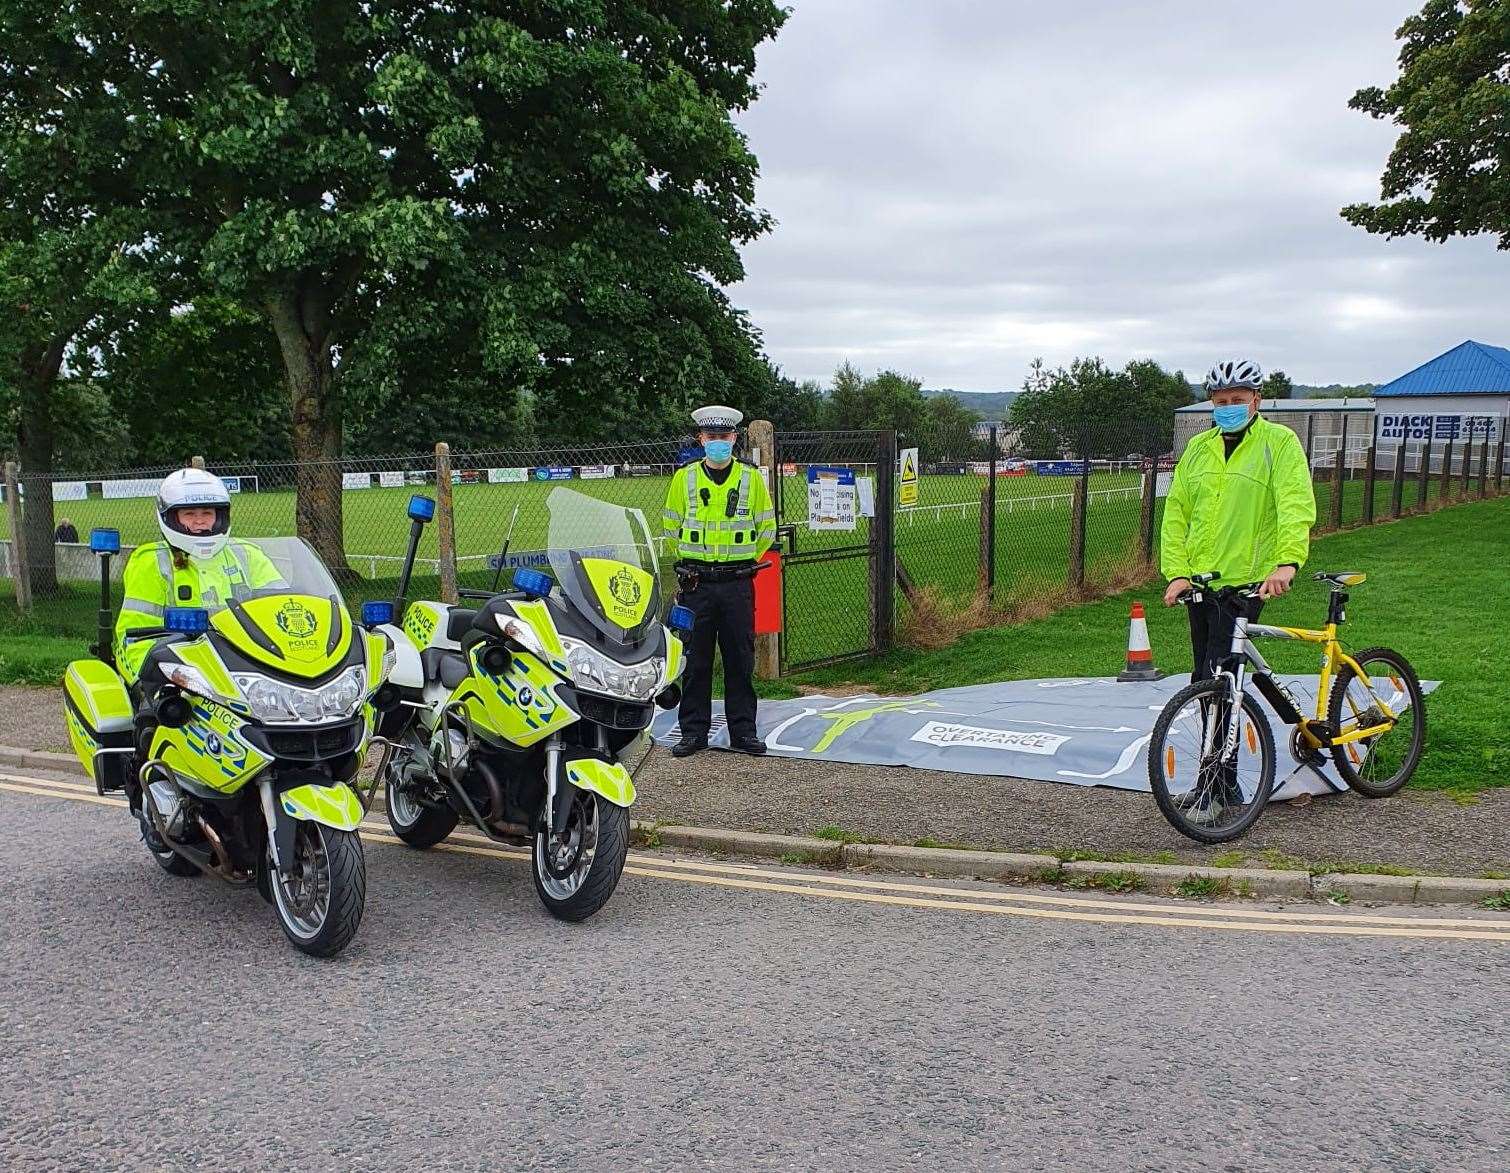 Operation Close Pass took place in Inverurie